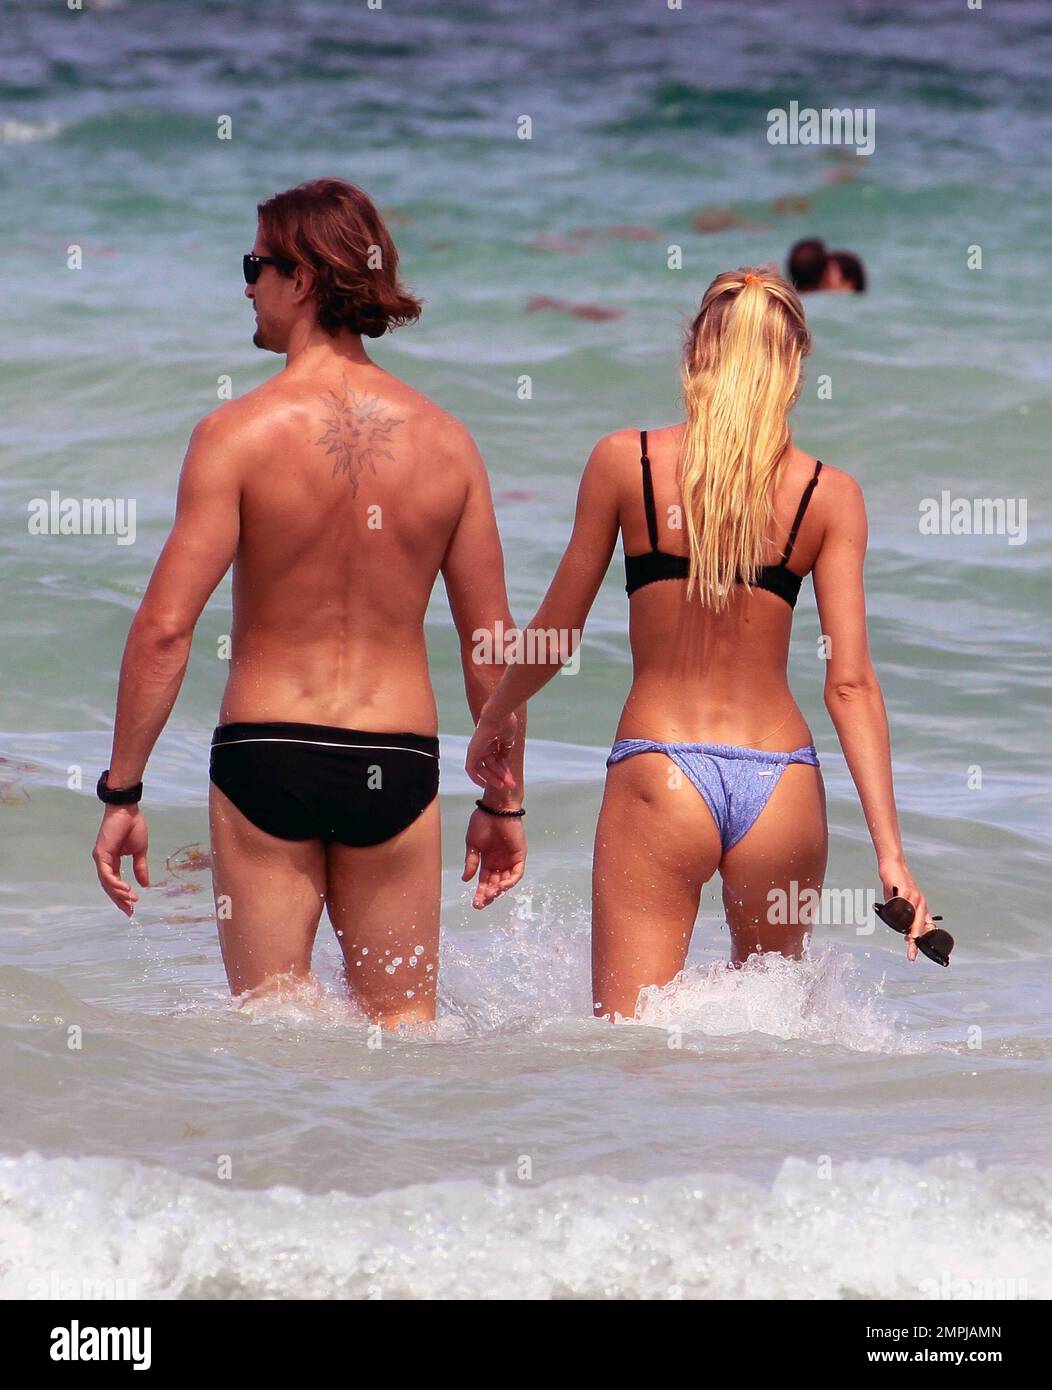 Victorias Secret supermodel Candice Swanepoel spends the Fourth of July holiday on the beach with her boyfriend Hermann Nicoli and friends